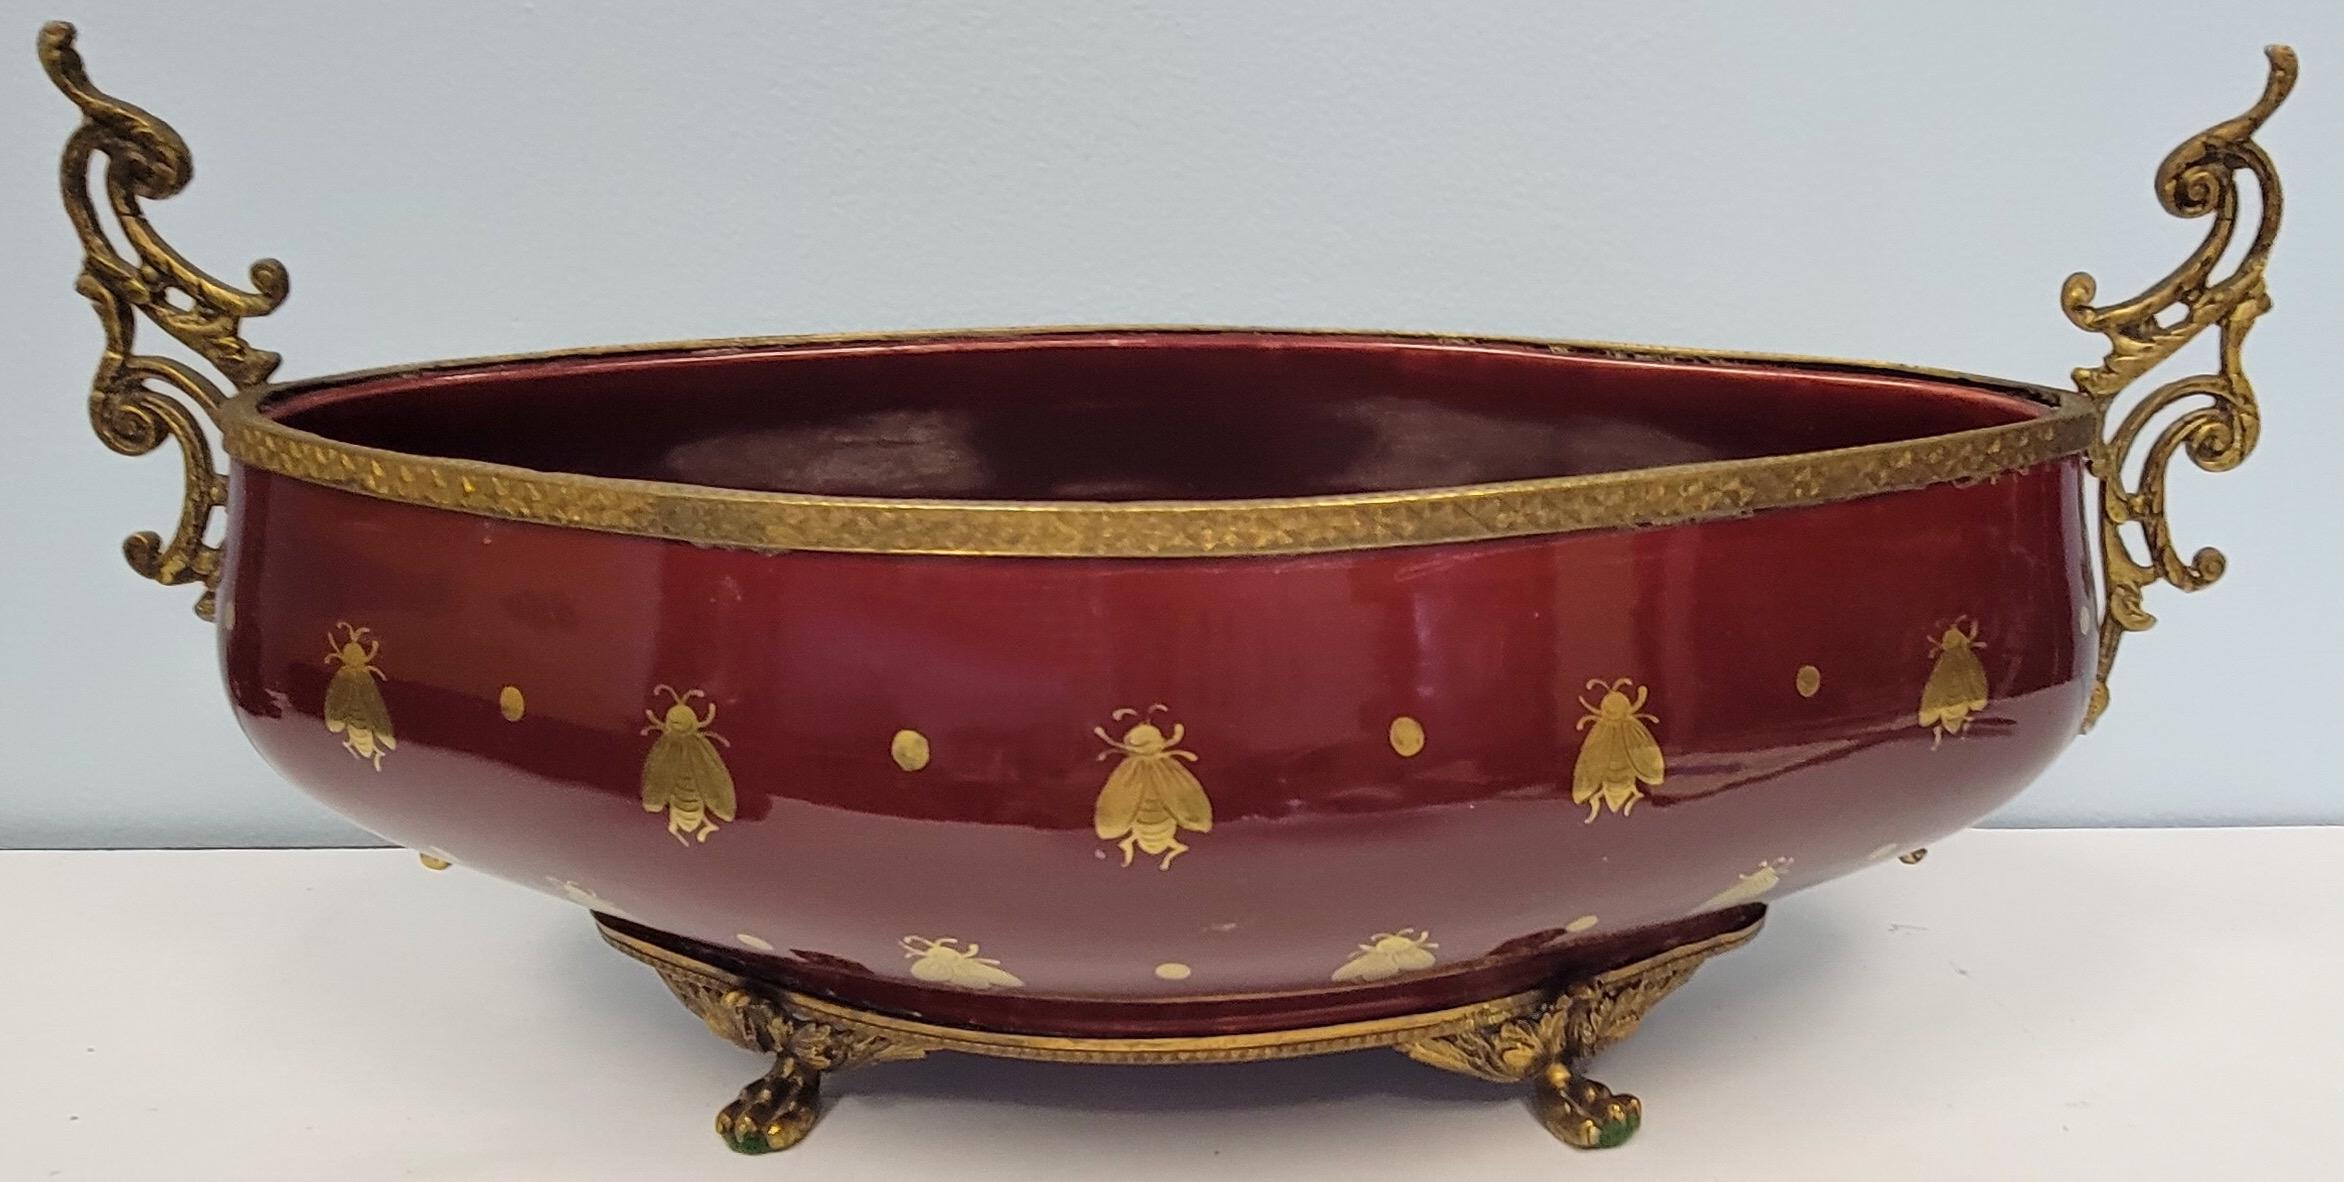 This is a 19th century French Empire gilt bronze jardiniere with a Napoleonic bee motif. It is marked on the underside. It is in wonderful condition. The enamel is a gorgeous garnet color which allows the gilt bees and bronze to shine. Height to the